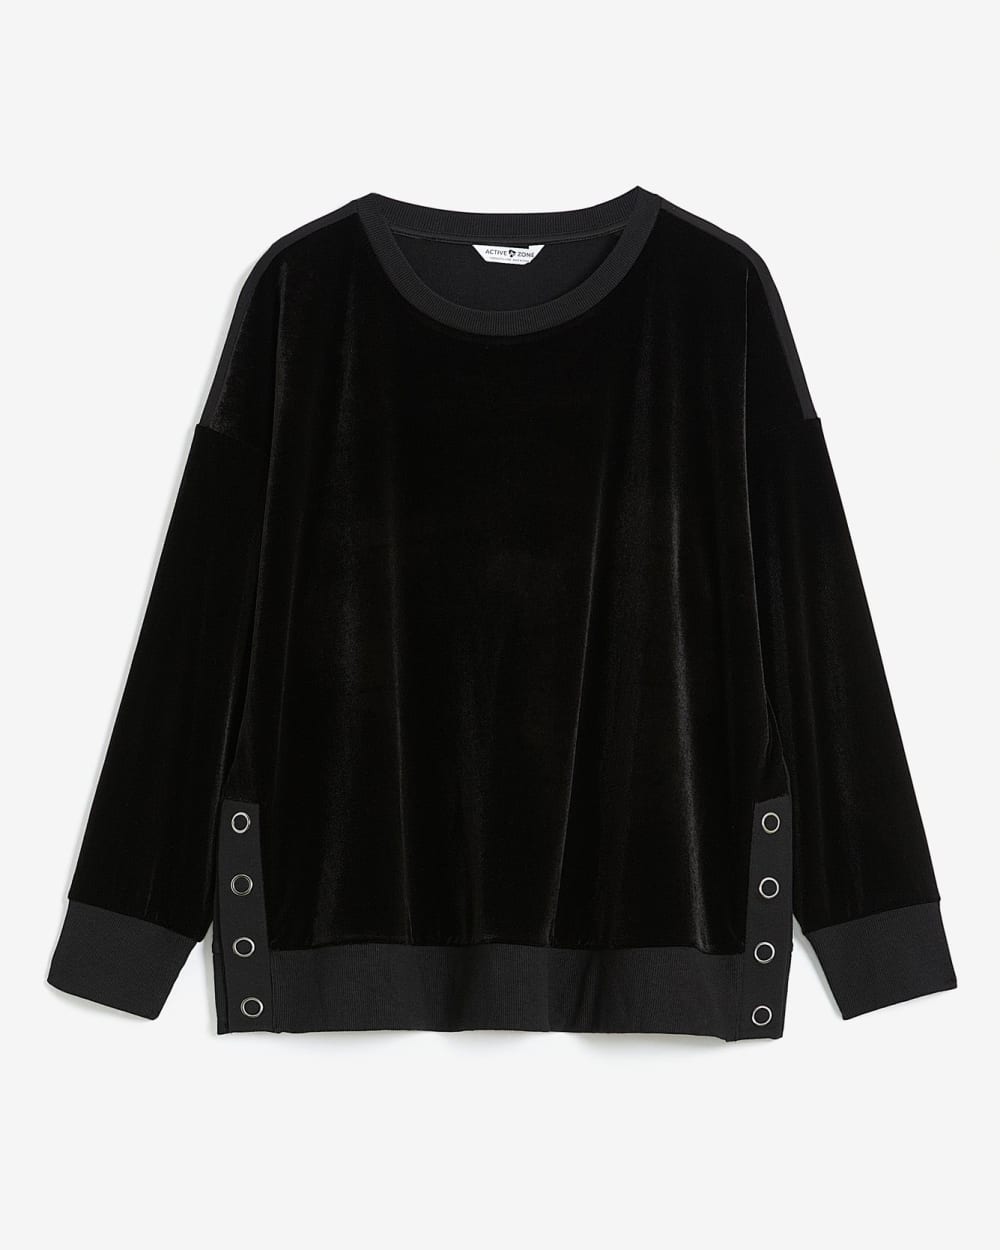 Velvet and French Terry Crewneck Top - Active Zone